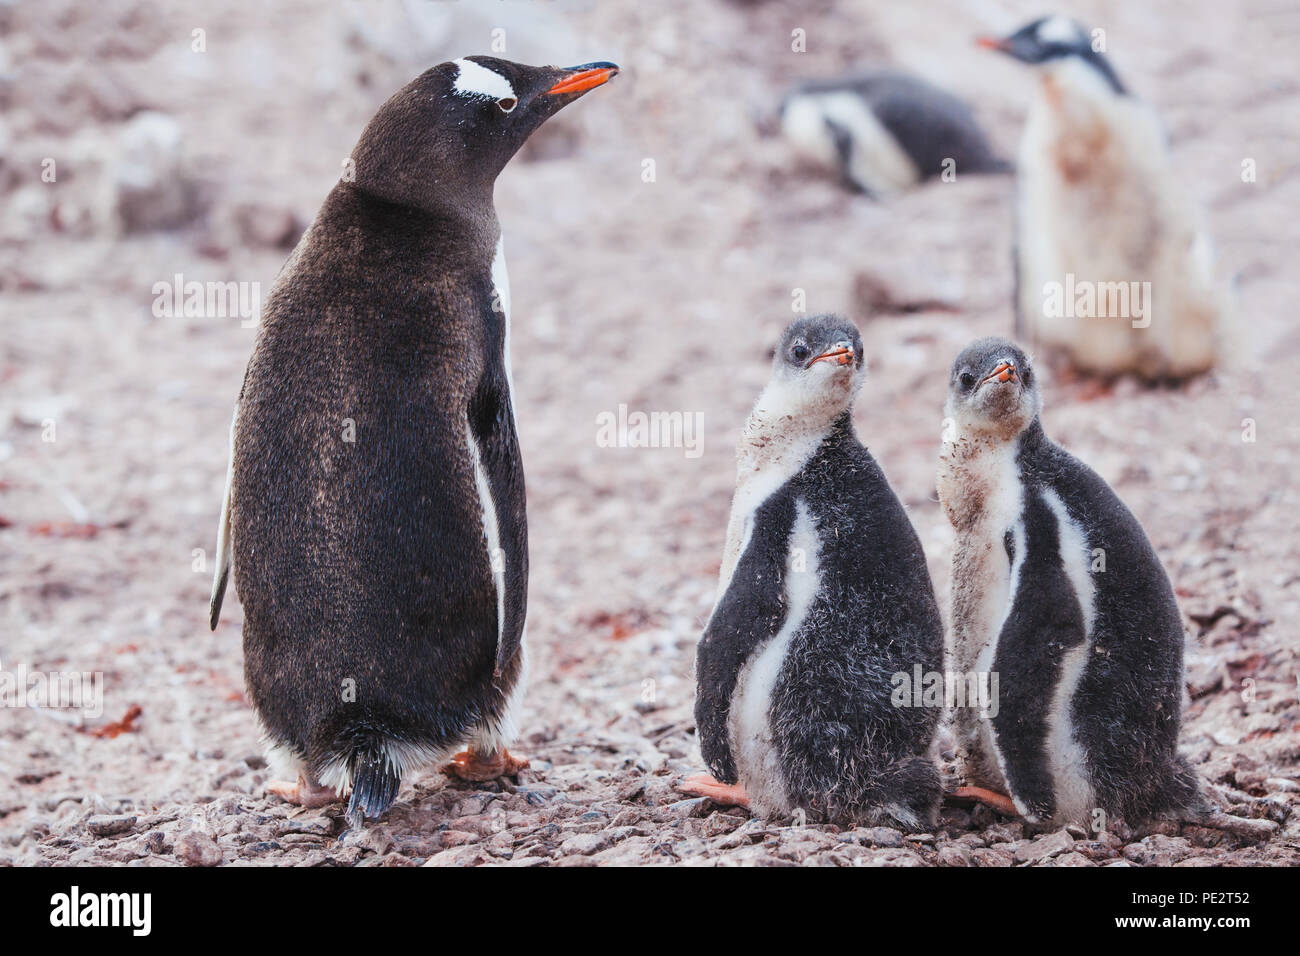 cute baby penguins, mother with chics, birds of Antarctica Stock Photo